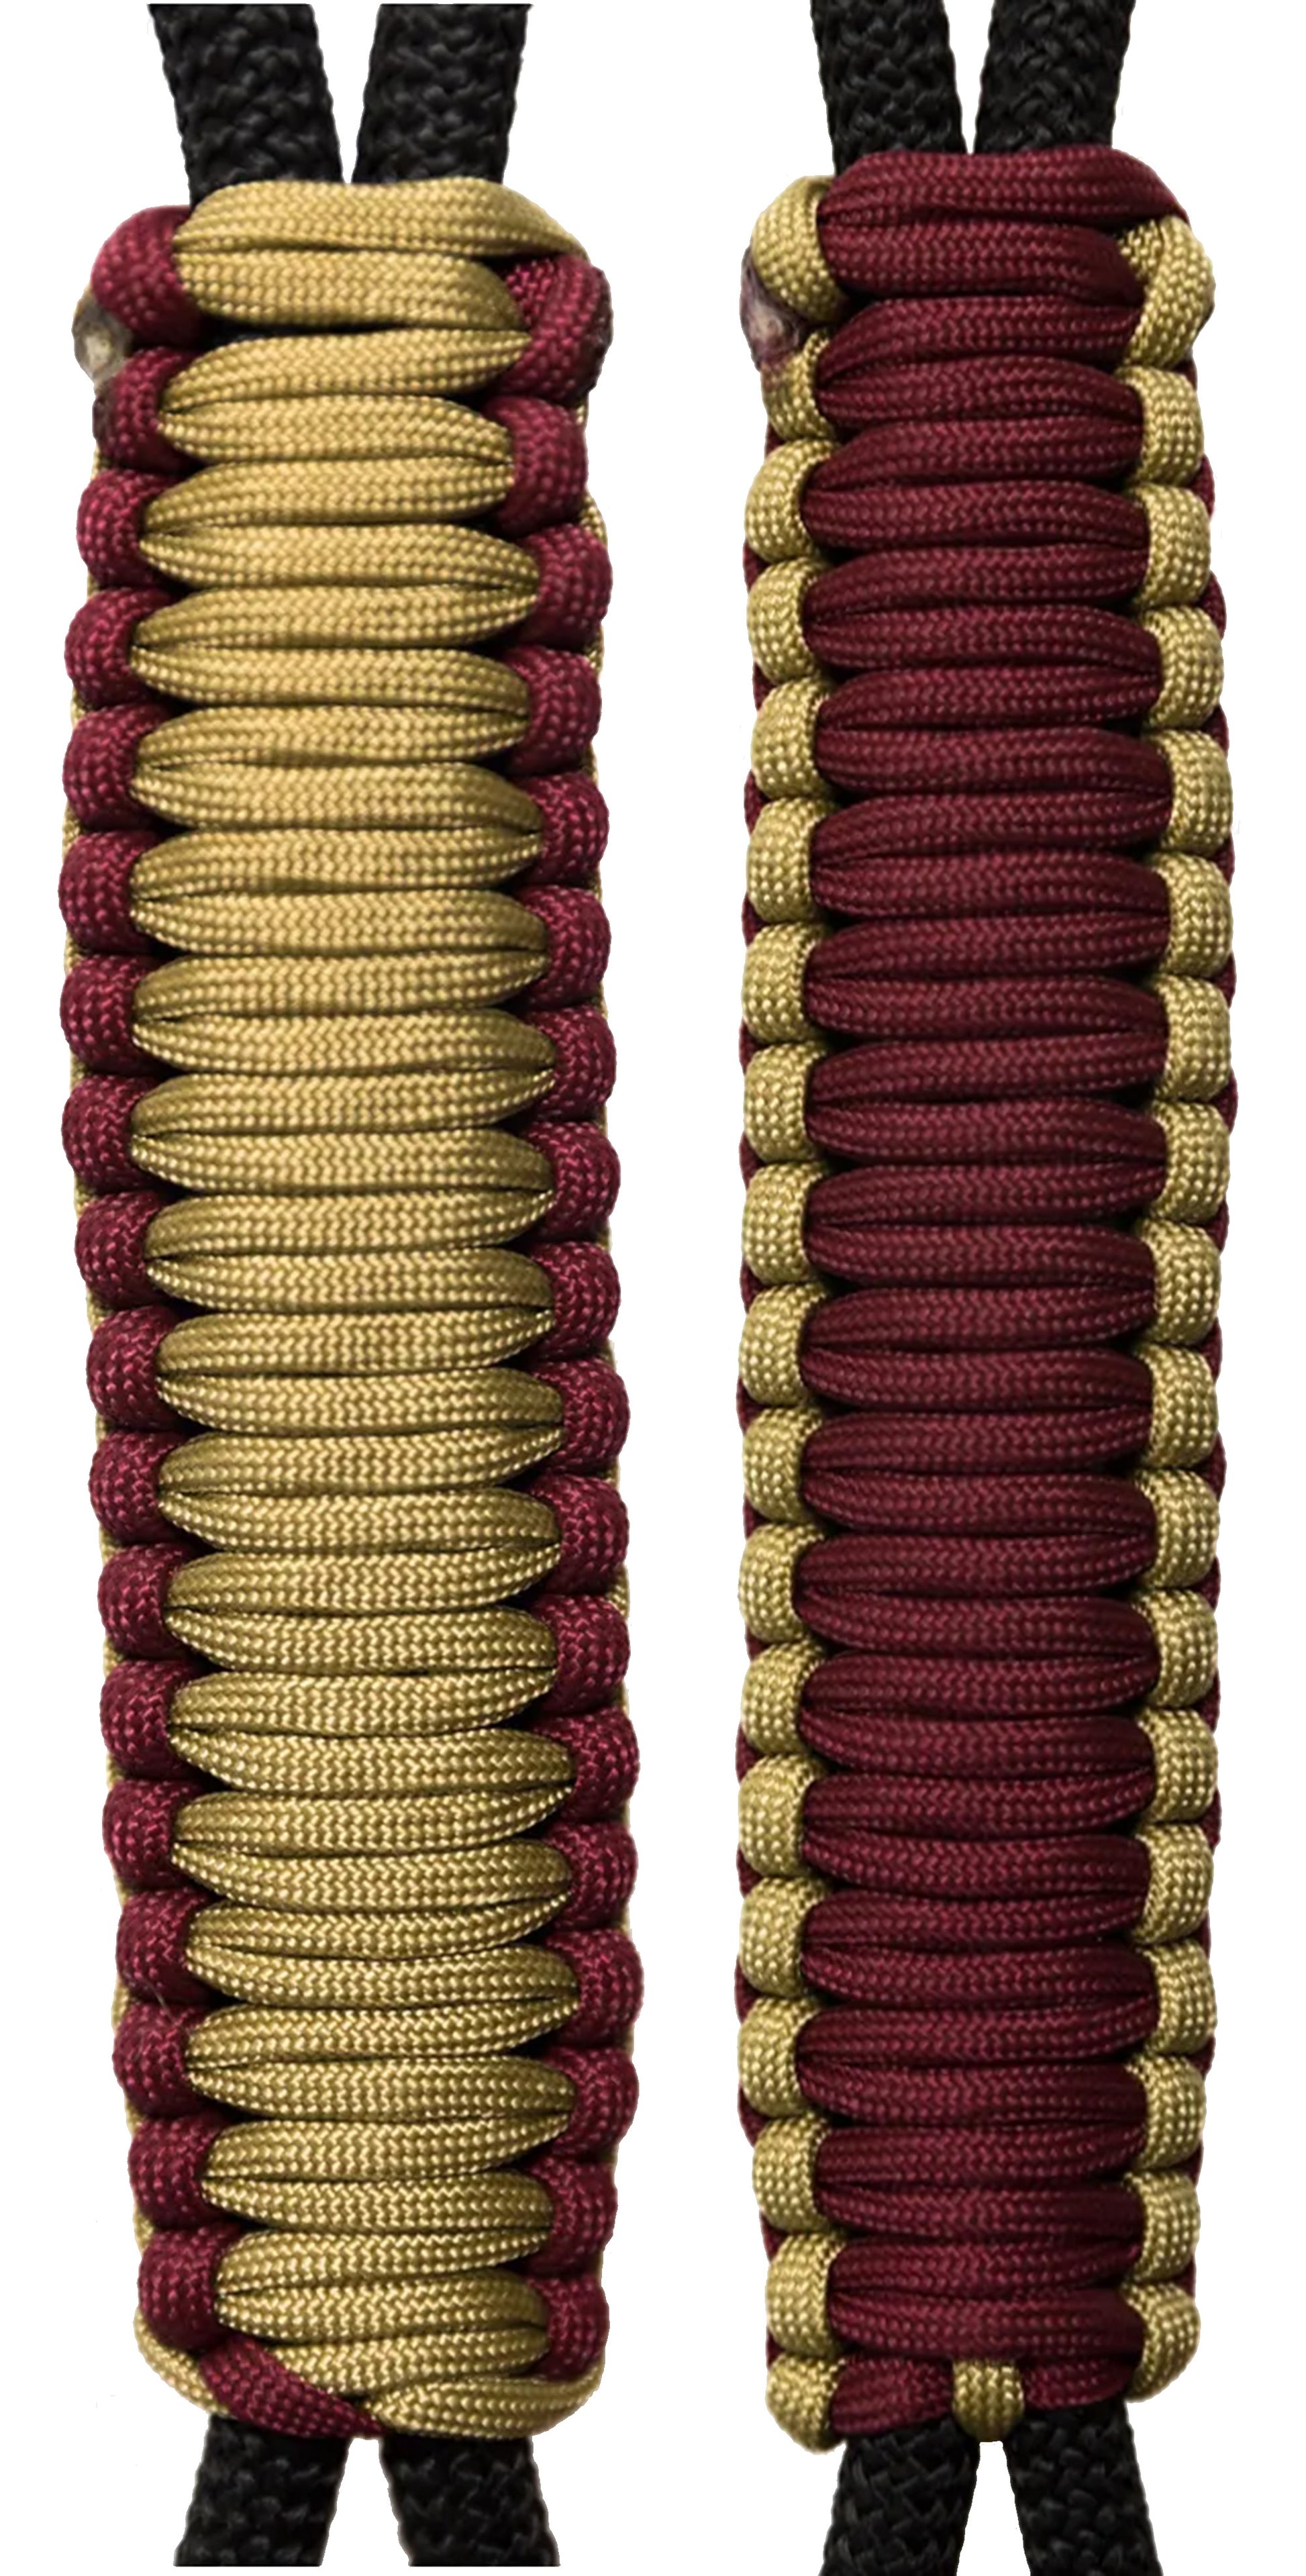 Maroon & Gold (Garnet & Gold) C006C030 - Paracord Handmade Handles for Stainless Steel Tumblers - Made in USA!